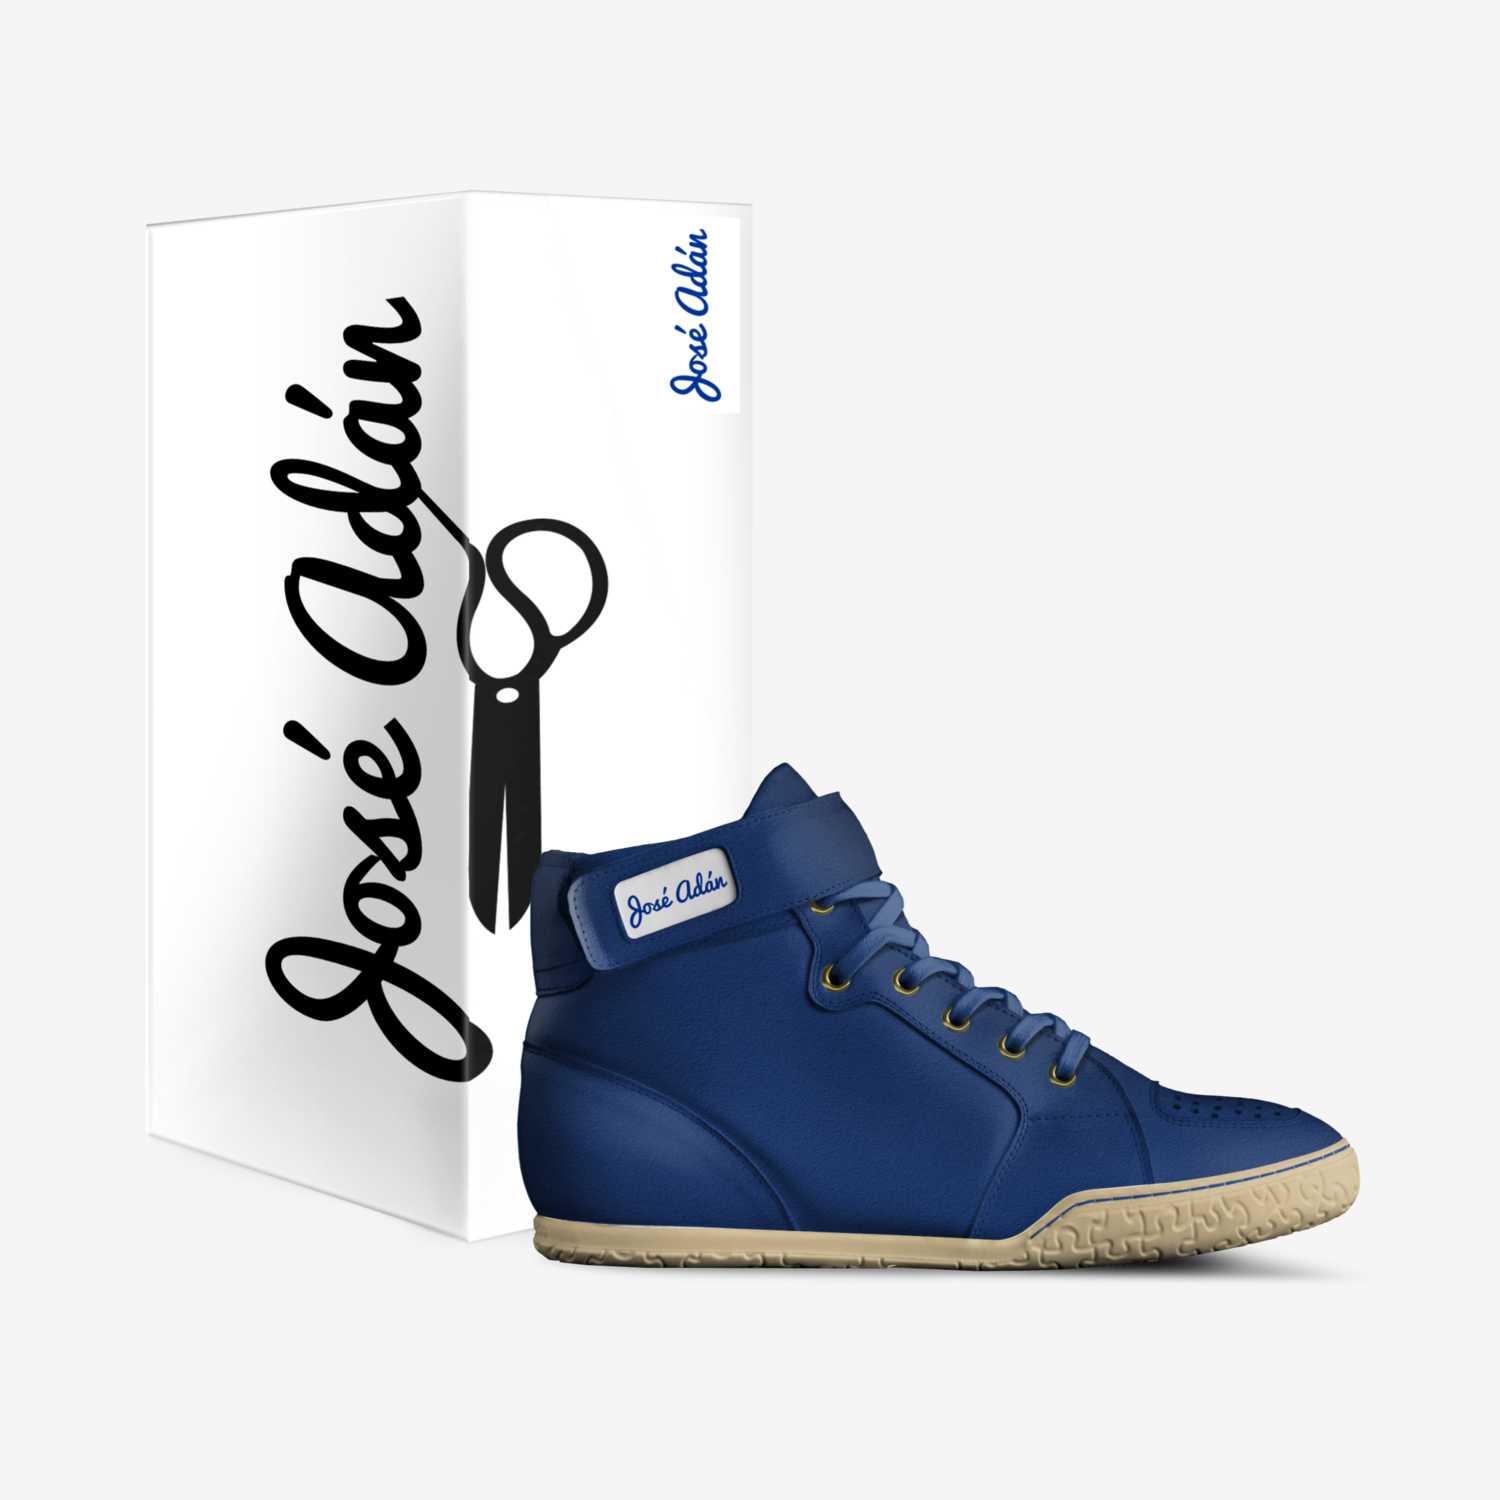 "Water" by JOSÉ ADÁN custom made in Italy shoes by Joseph Adams | Box view